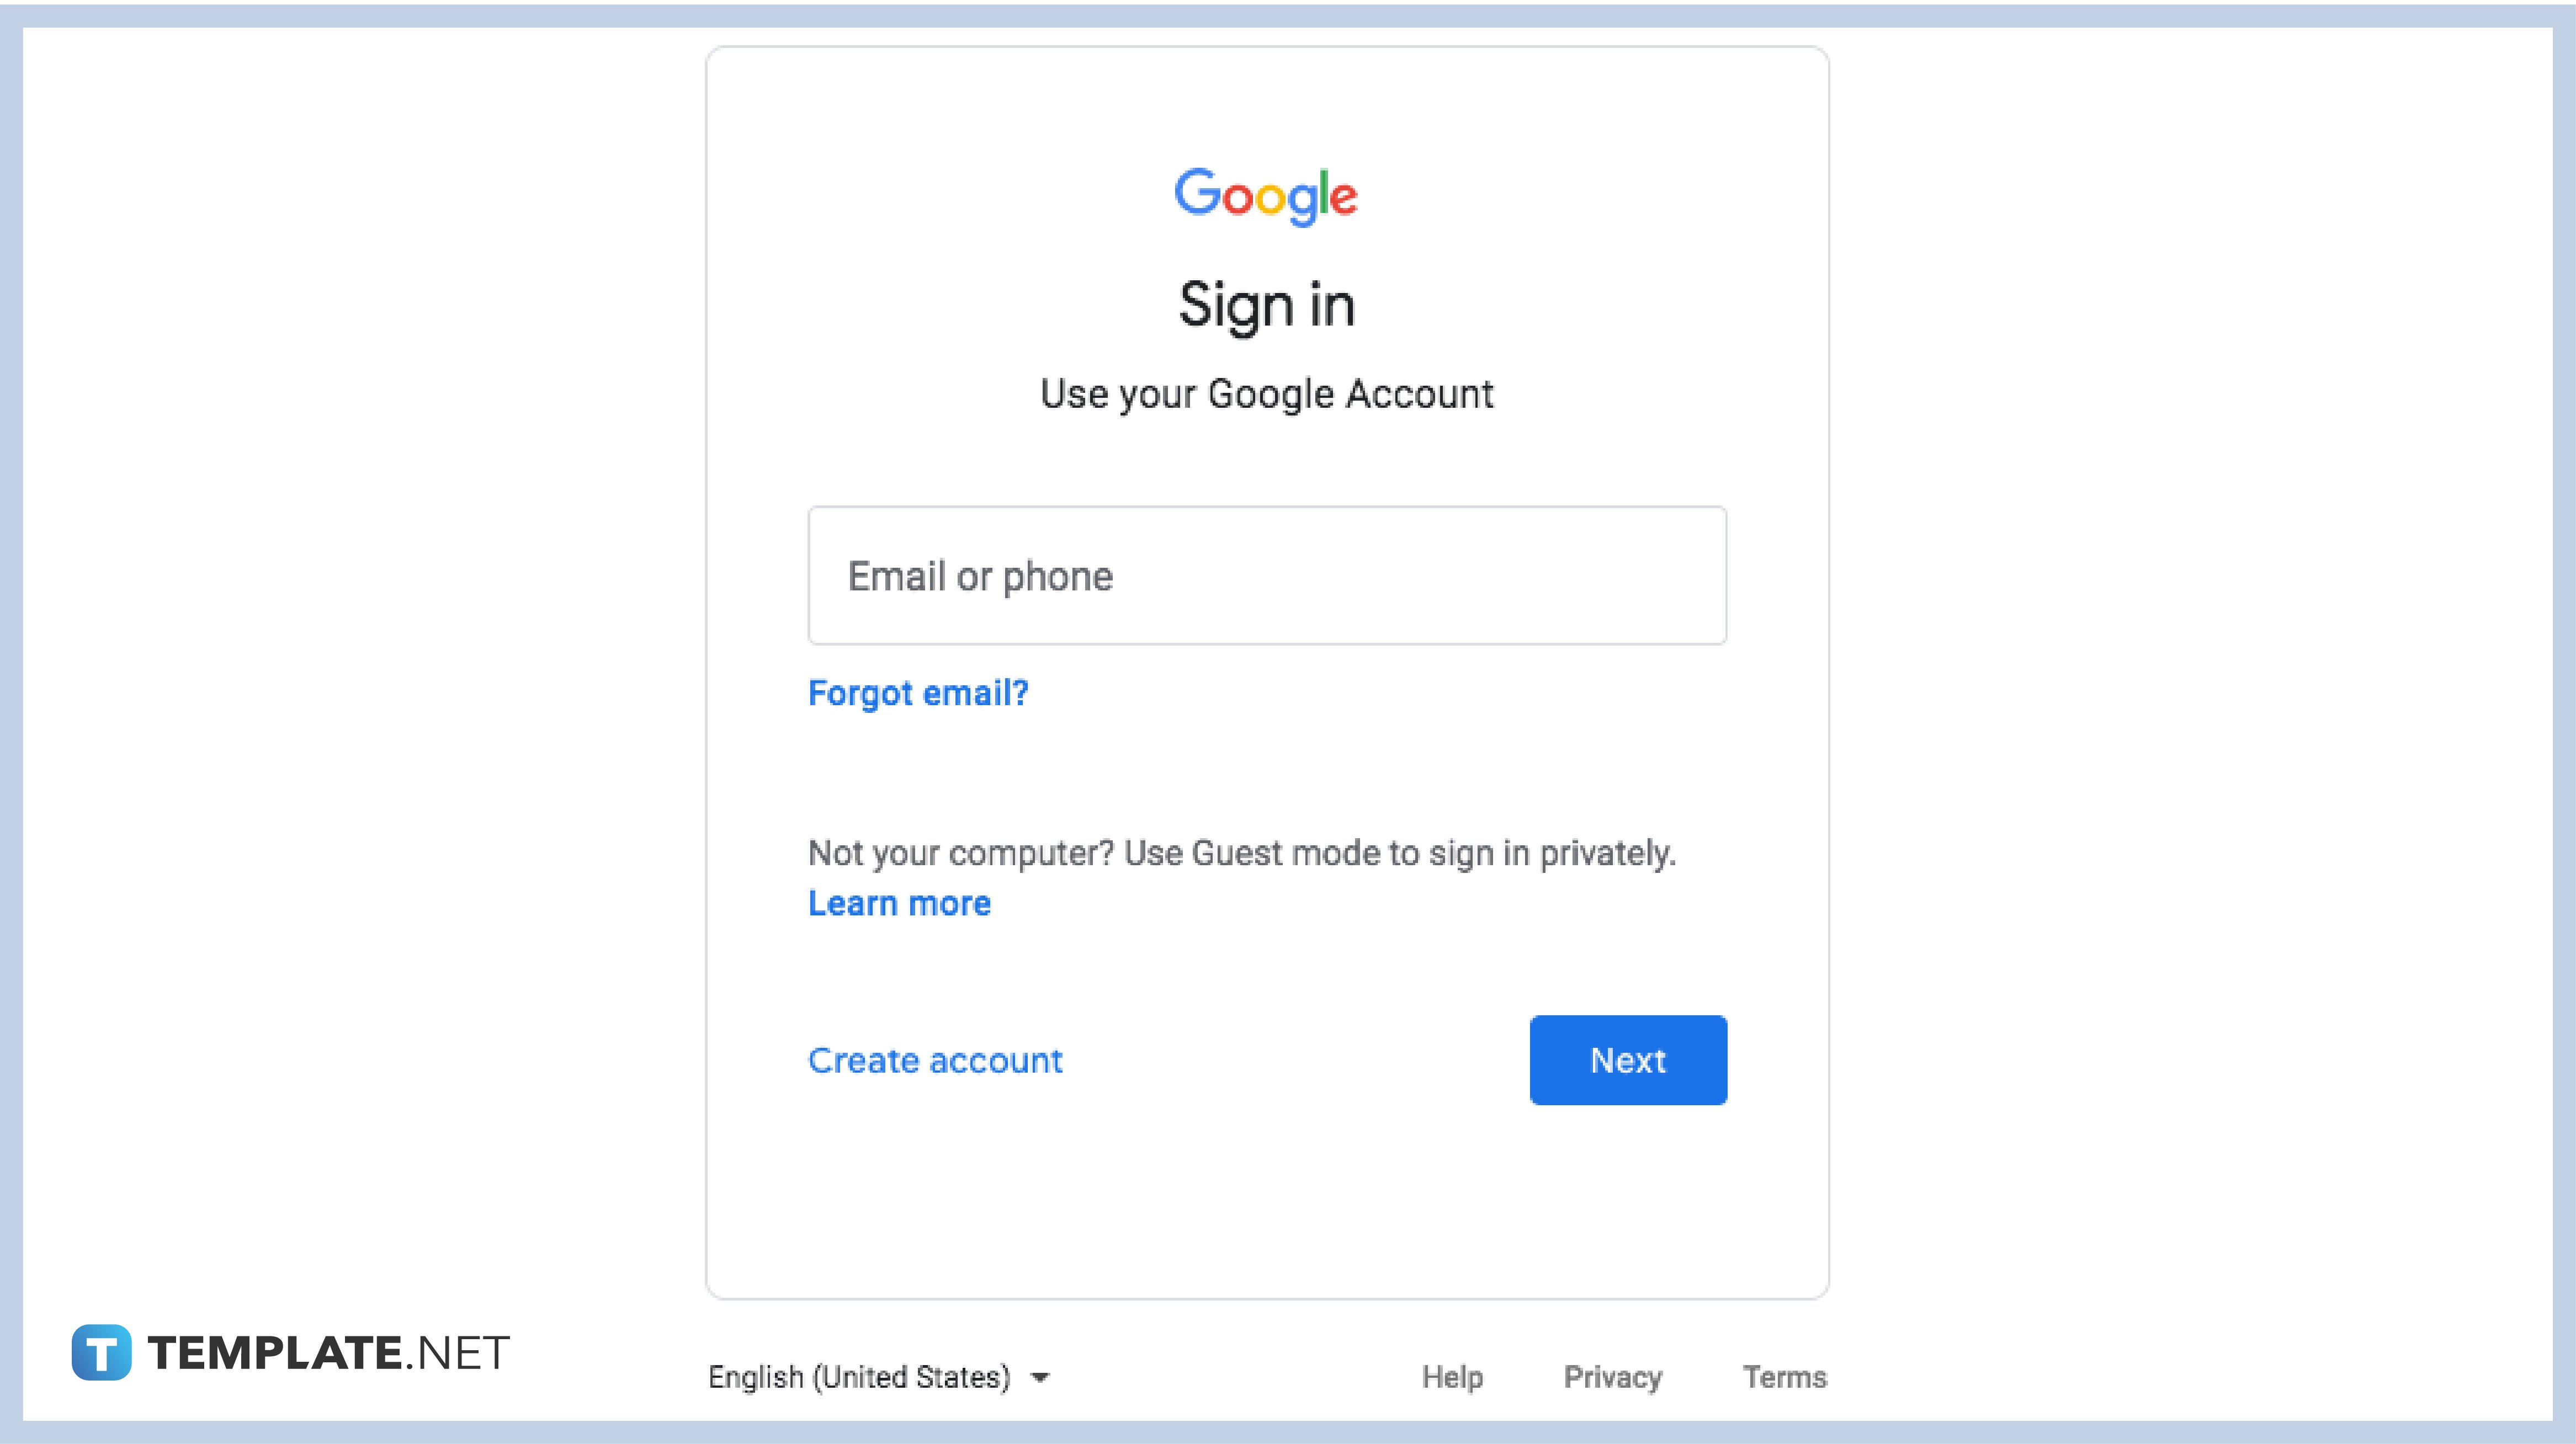 step-1-sign-in-to-your-google-account-01